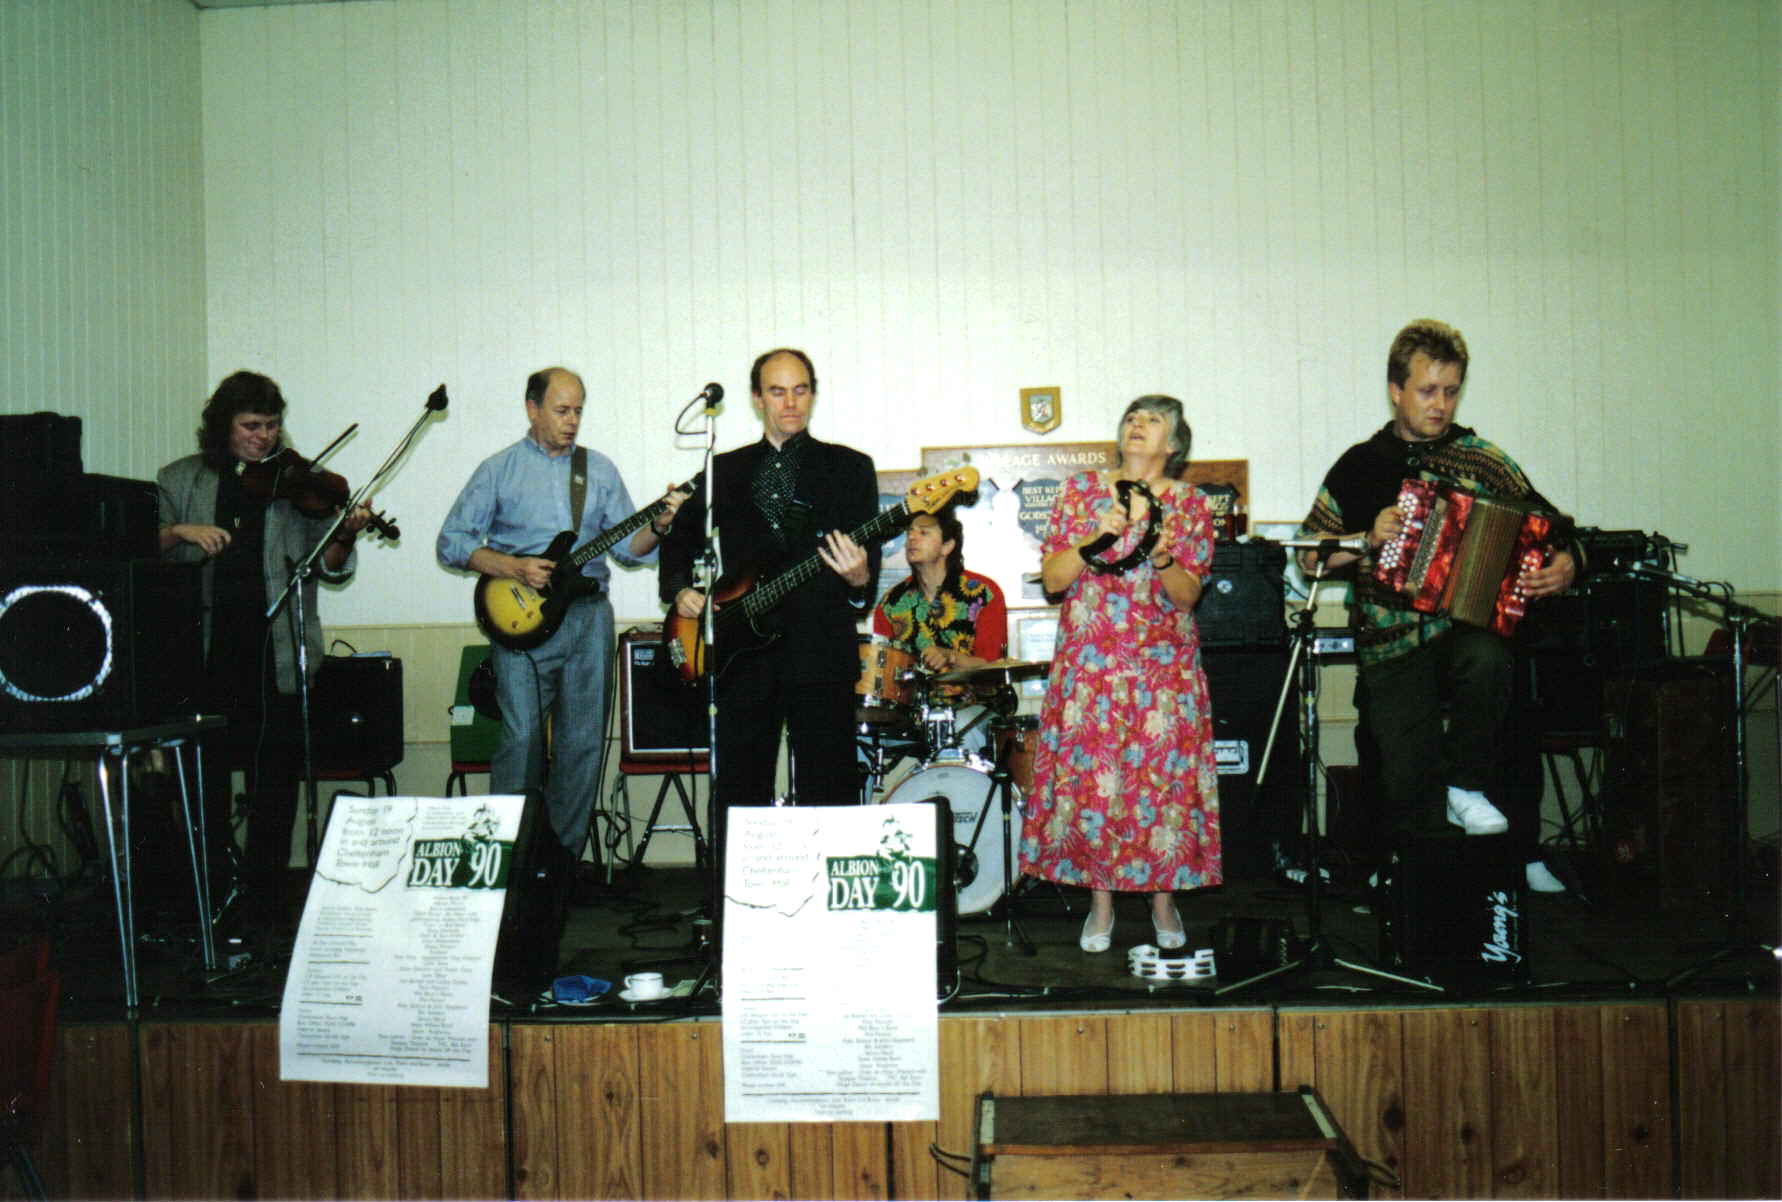 Stephen Giles with Albion Band, 1990